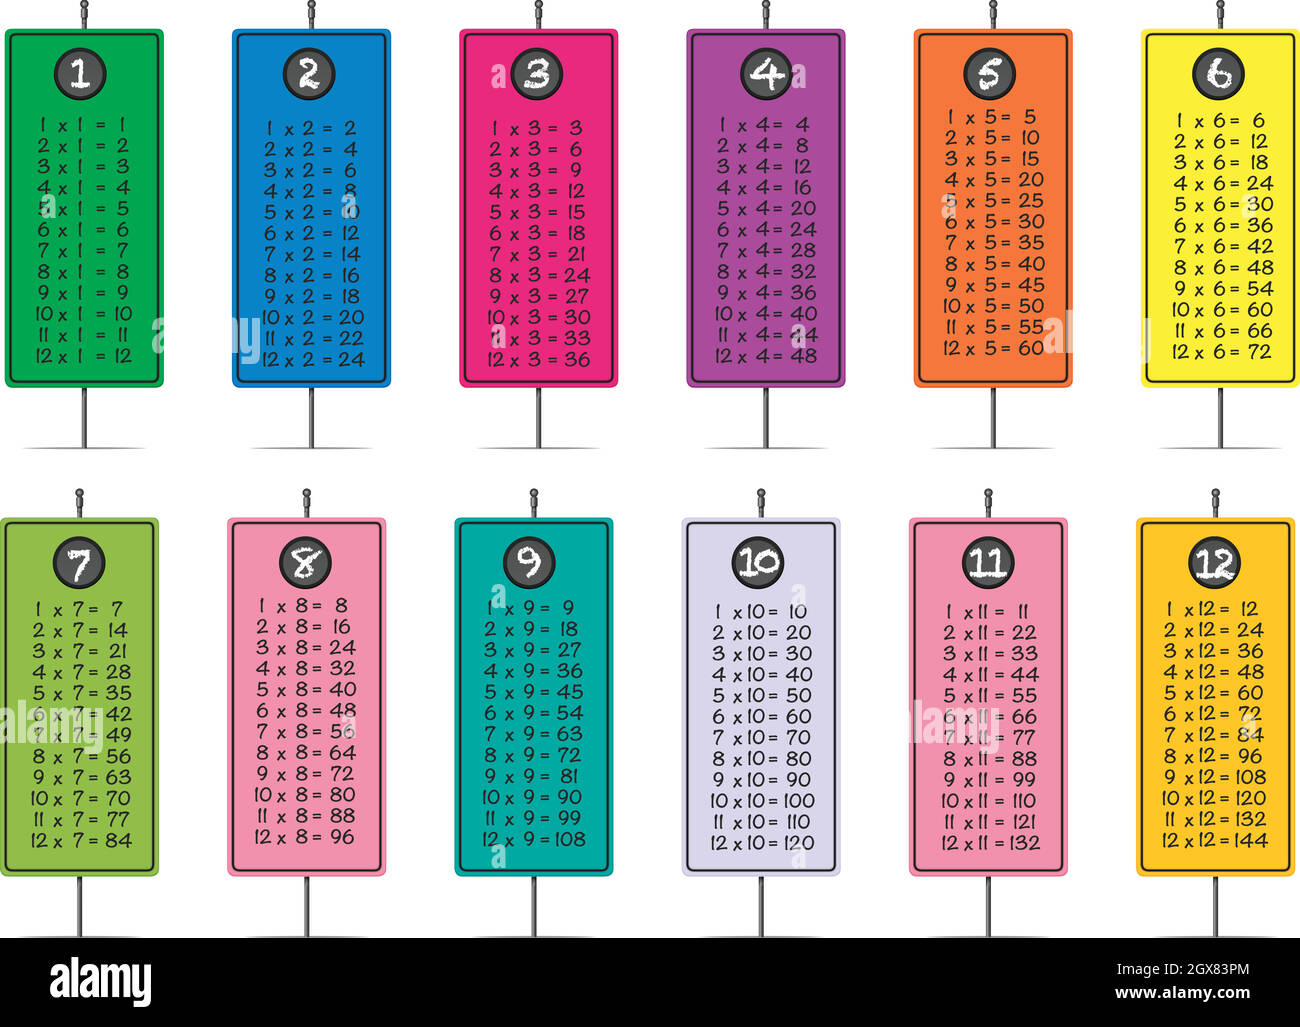 Multiplication tables template in different colors Stock Vector